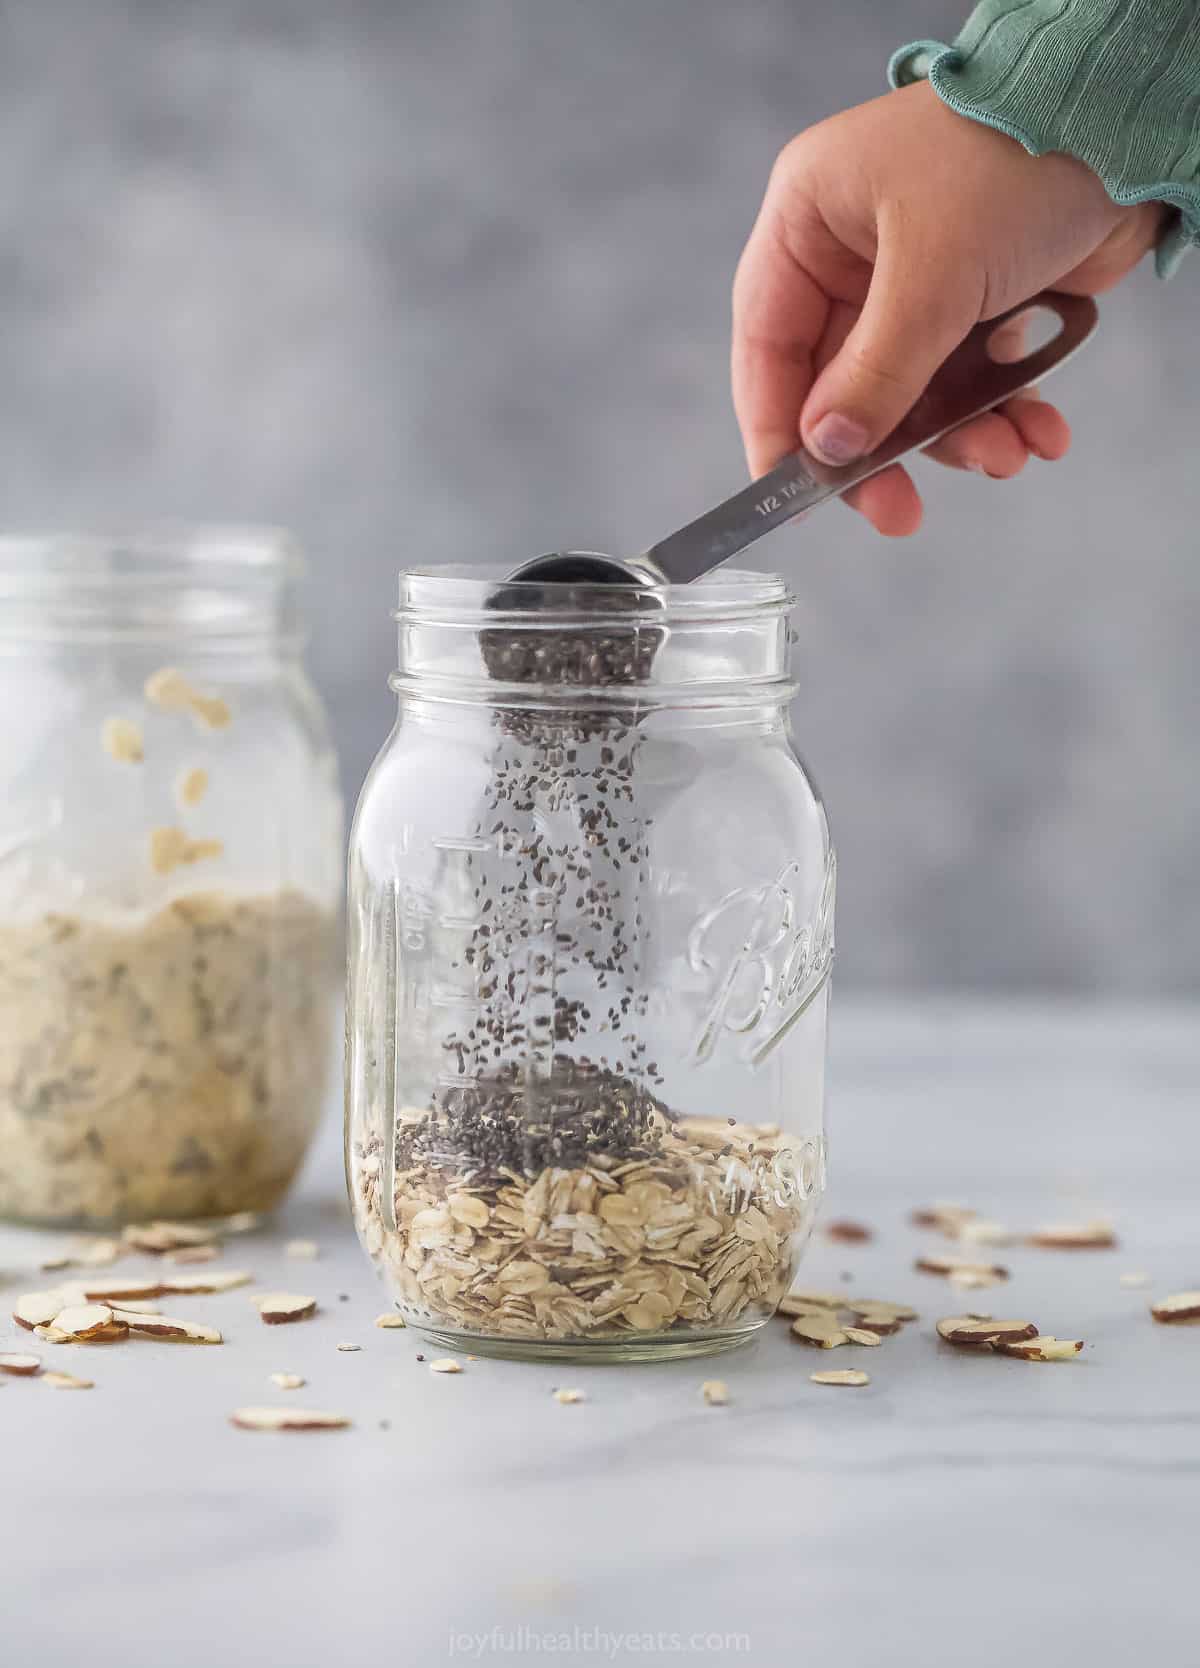 Chia seeds being poured into a glass jar containing rolled oats